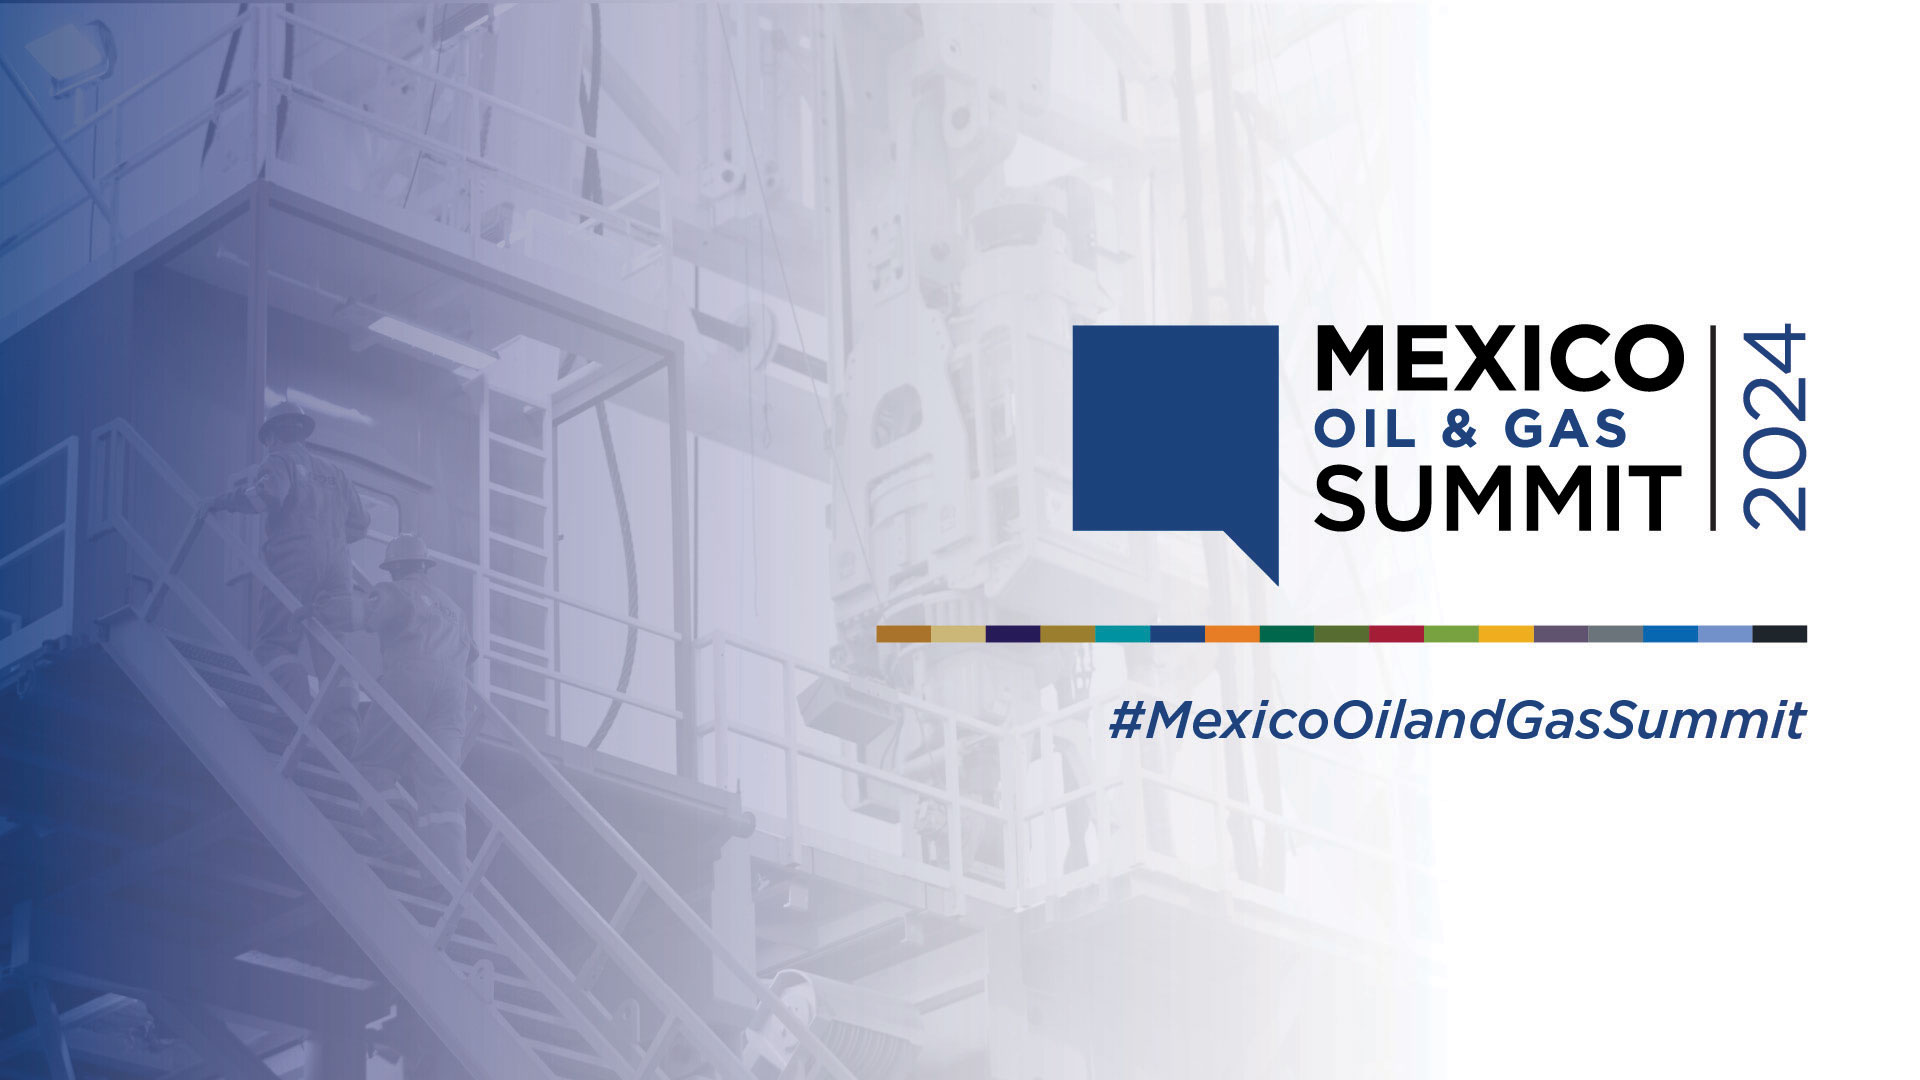 Mexico Oil & Gas Summit Mexico Business Events